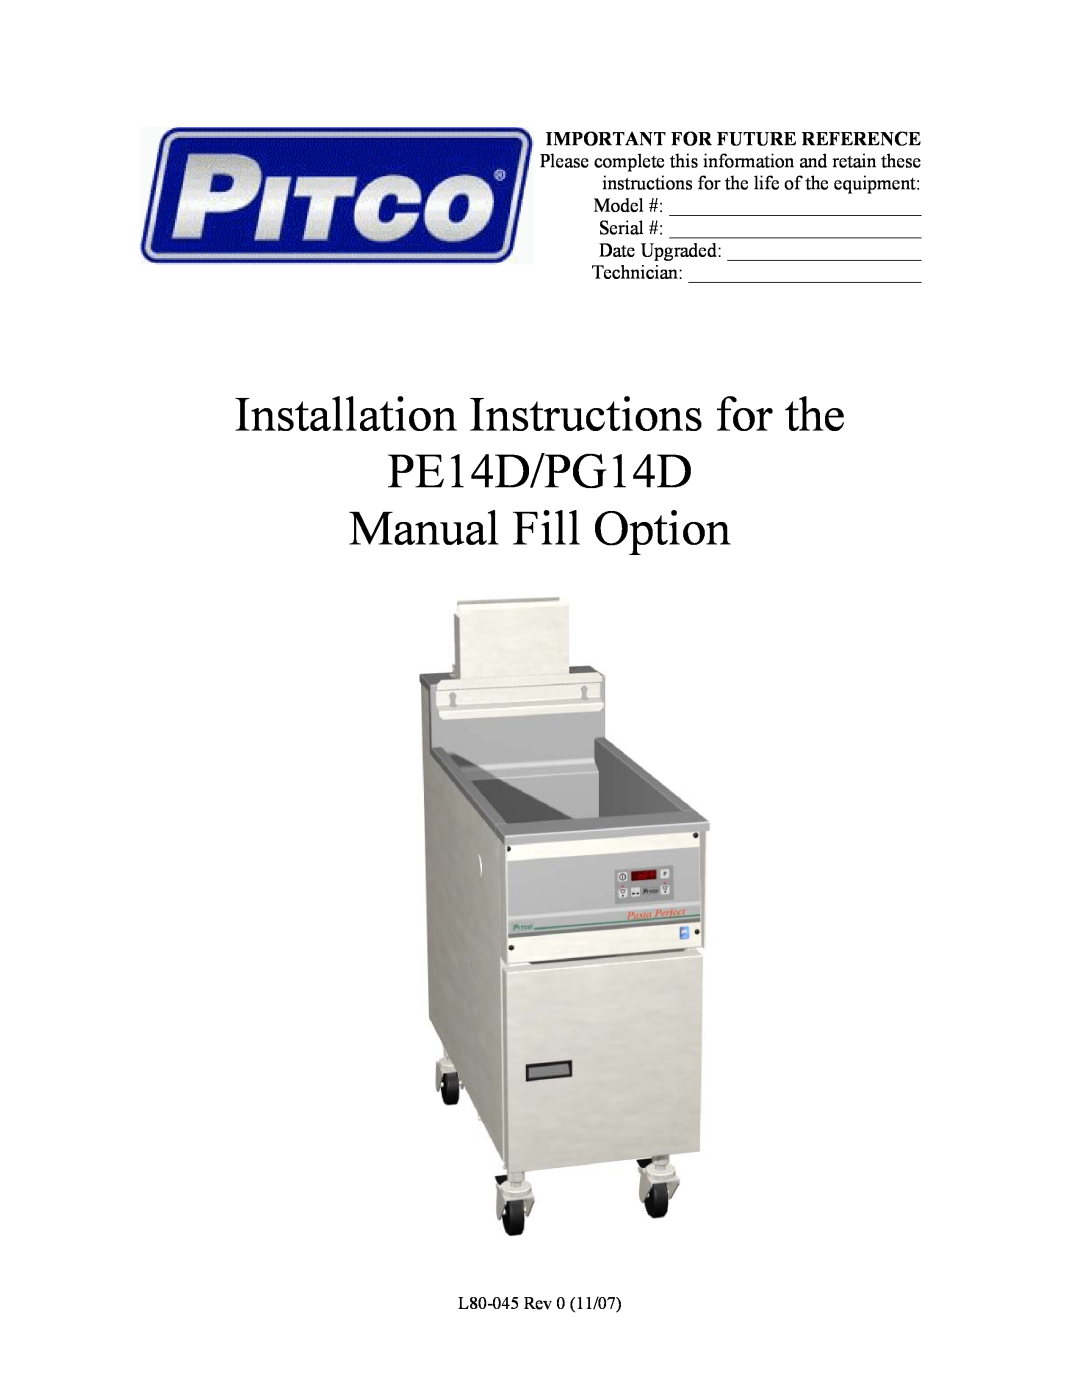 Pitco Frialator installation instructions Installation Instructions for the PE14D/PG14D, Manual Fill Option, Model # 